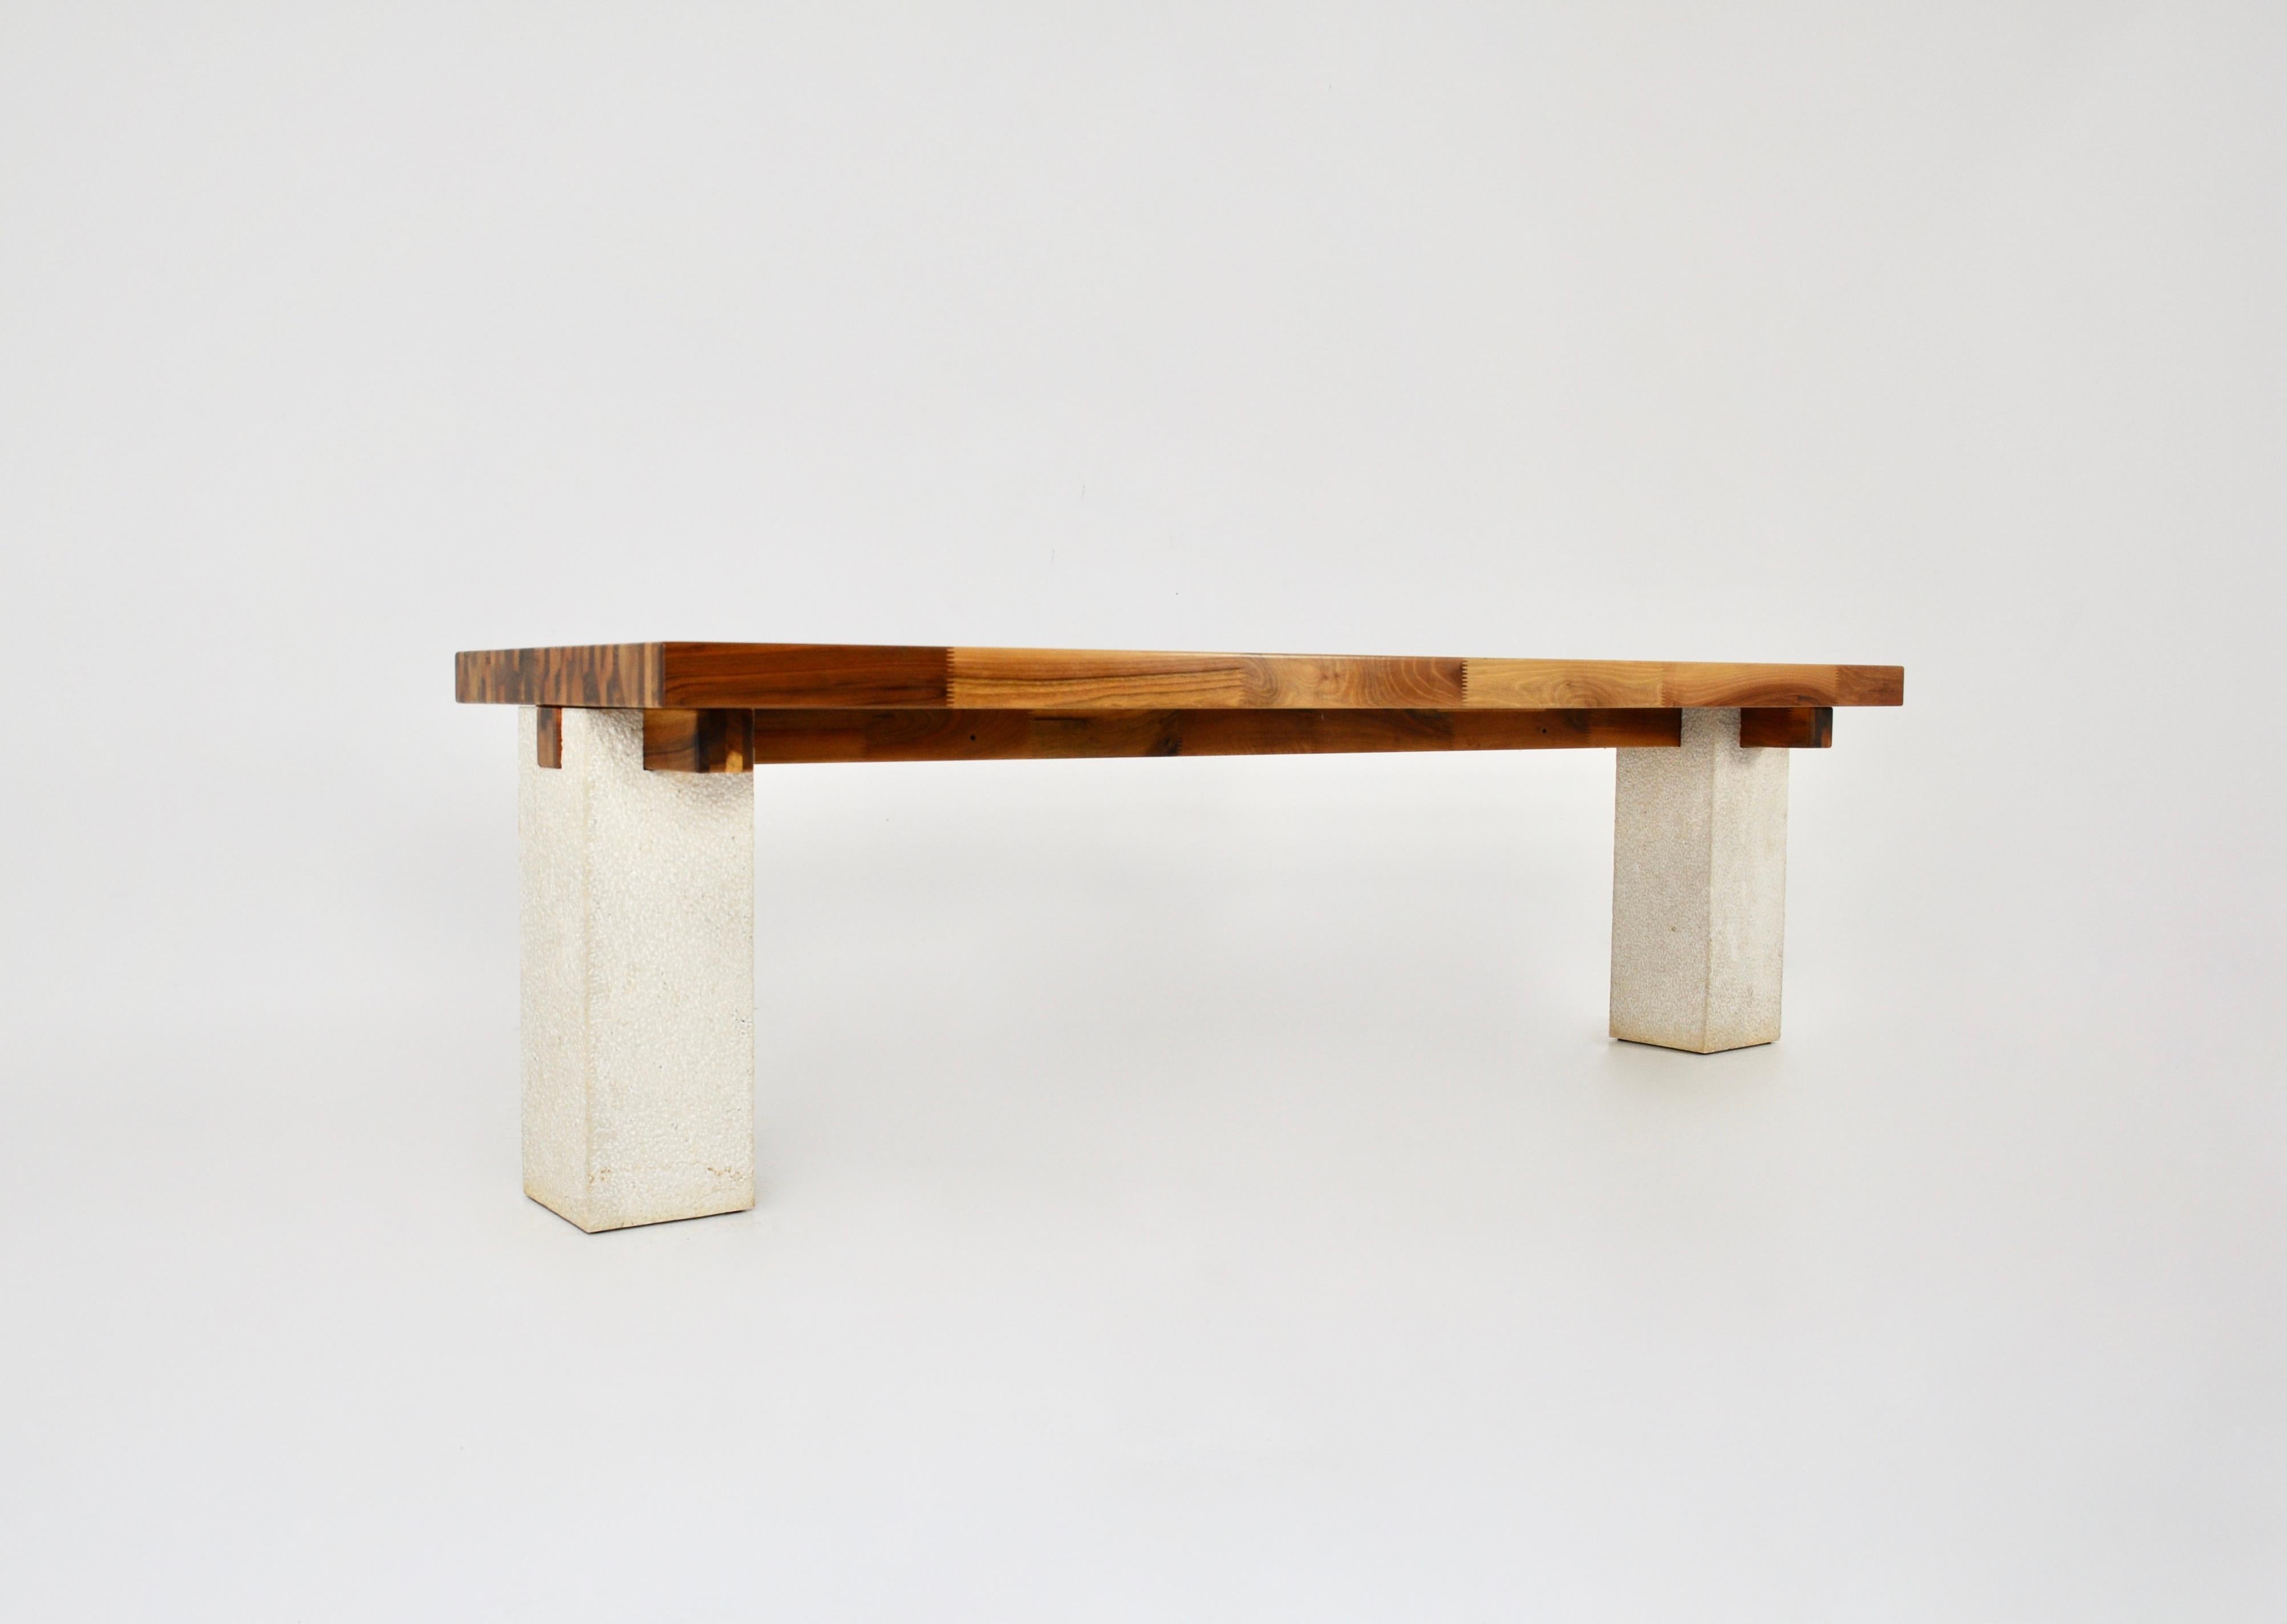 Rare large dining table by Gio Pomodoro created in a number of copies, this table is number 4. The top is in wood with the centre and legs in marble. Signed Gio Pomodoro. Wear due to time and age of the table.